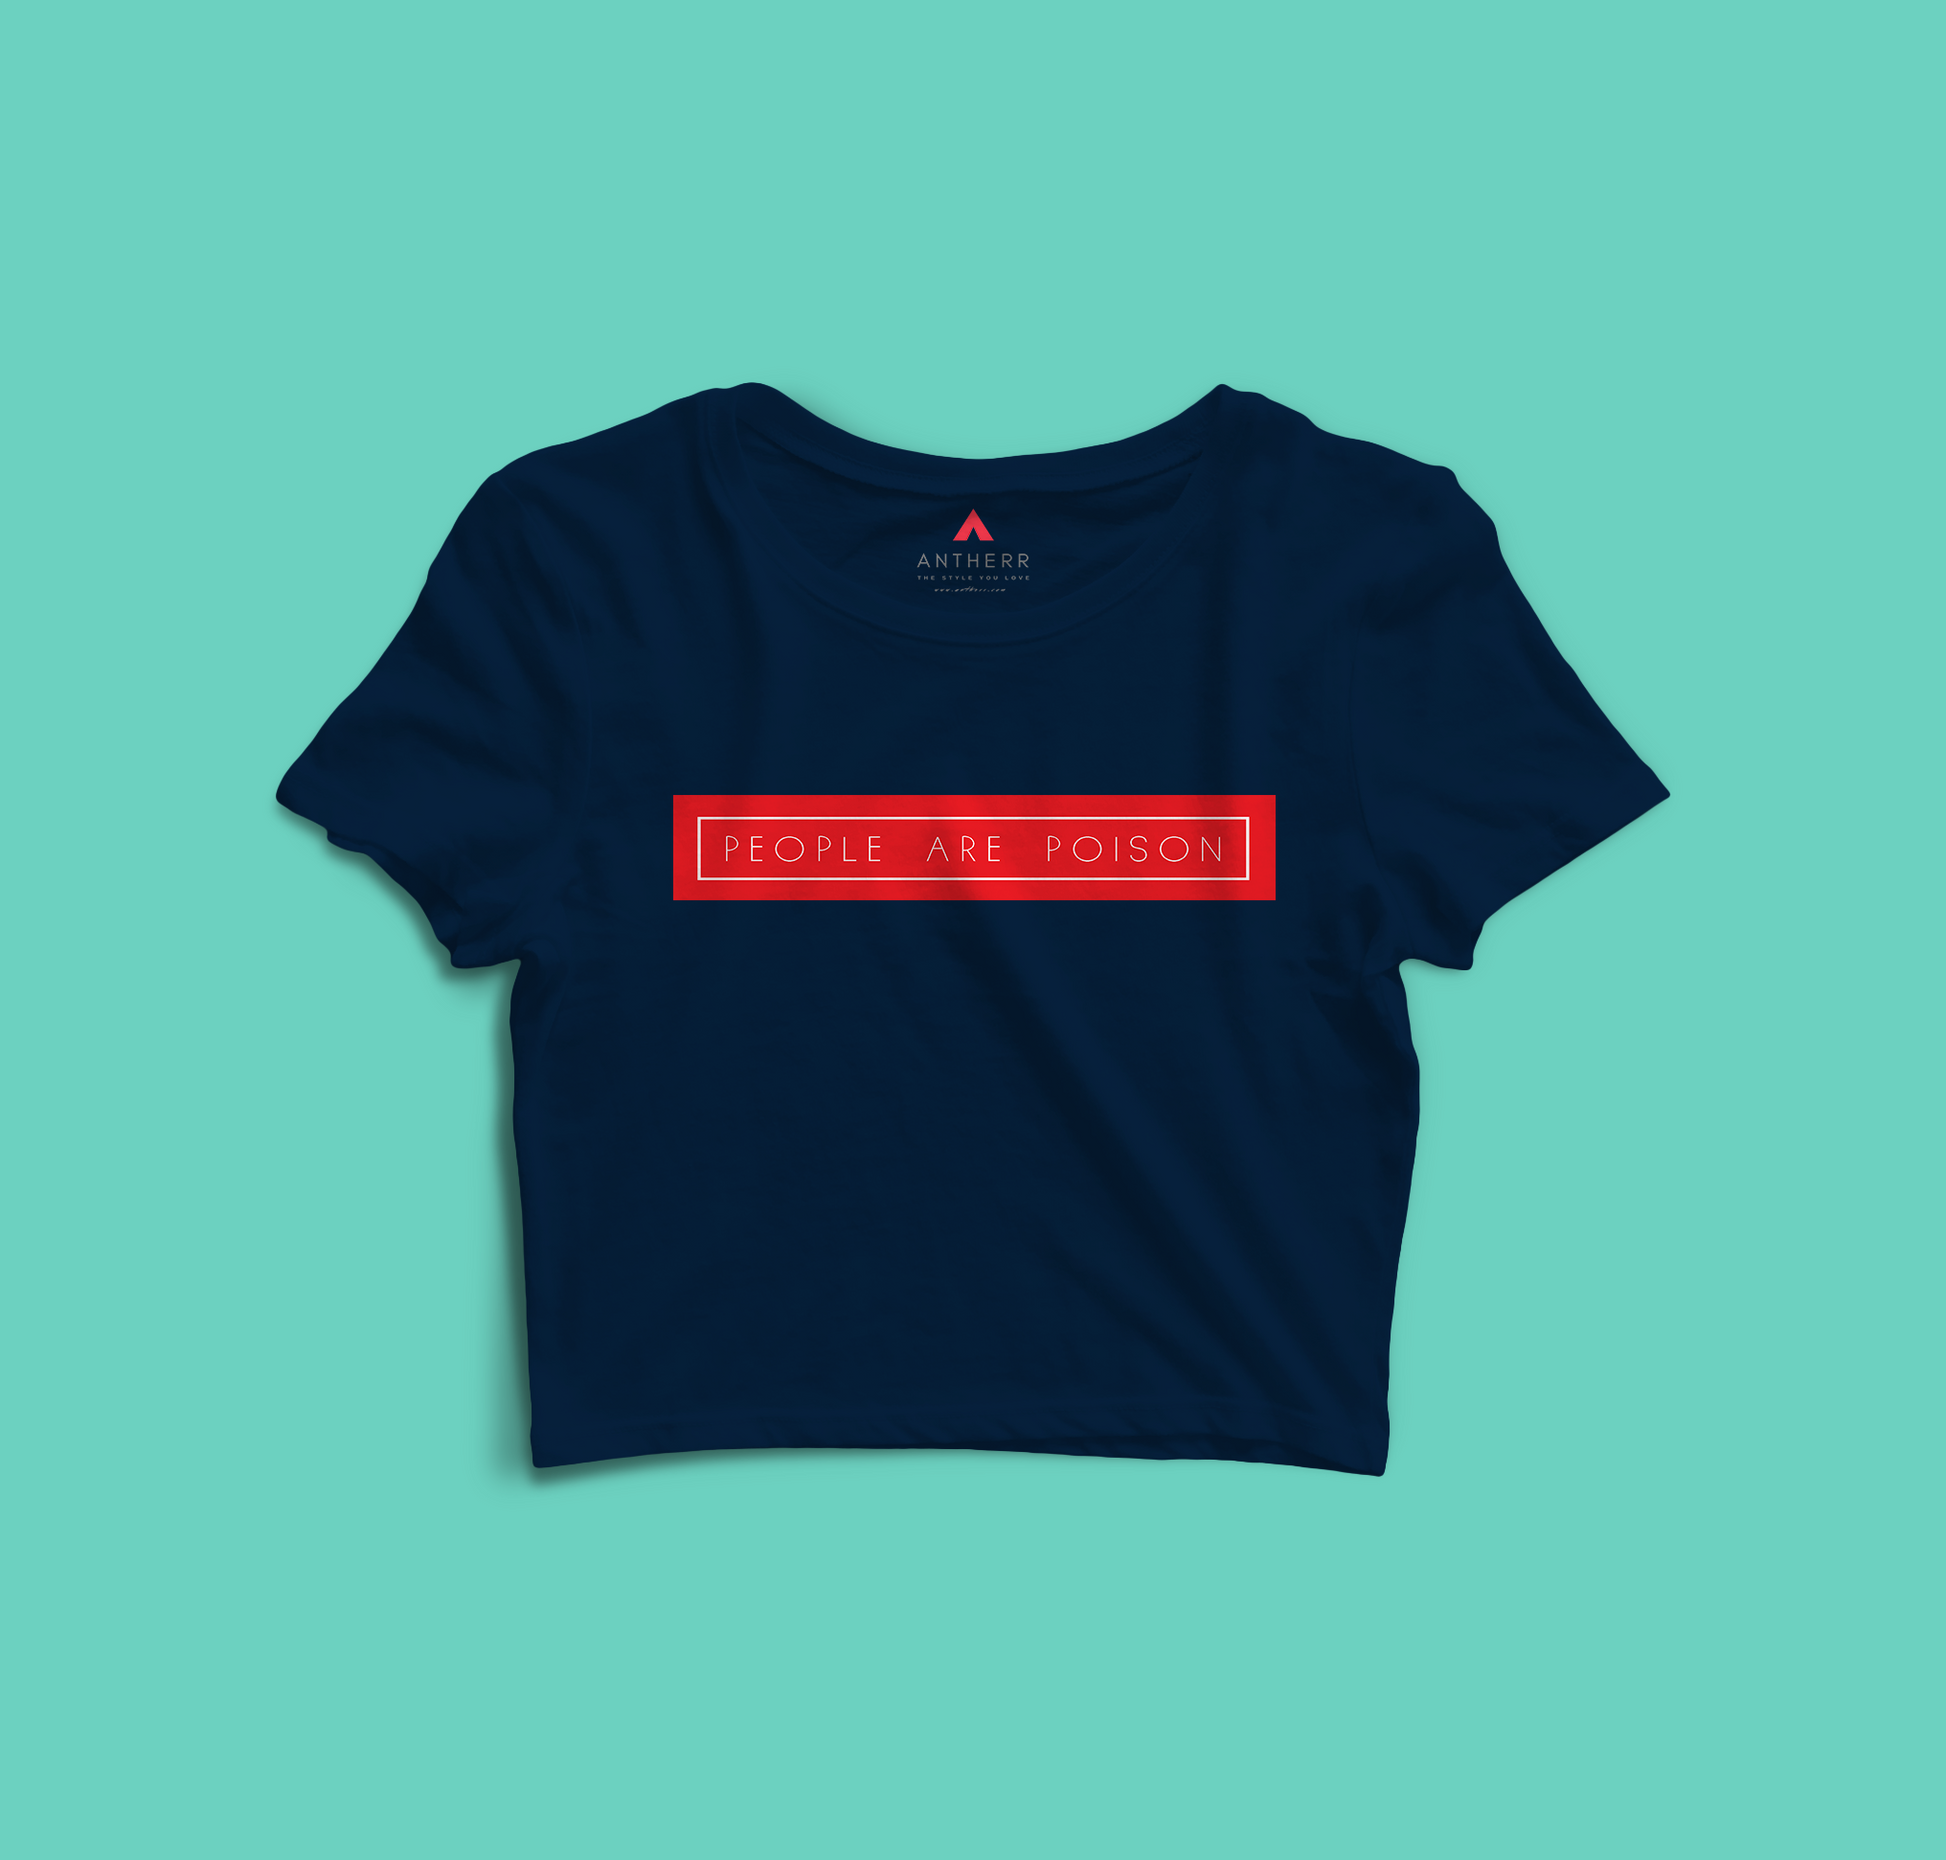 "PEOPLE ARE POISON" - HALF-SLEEVE T-SHIRT'S NAVY BLUE